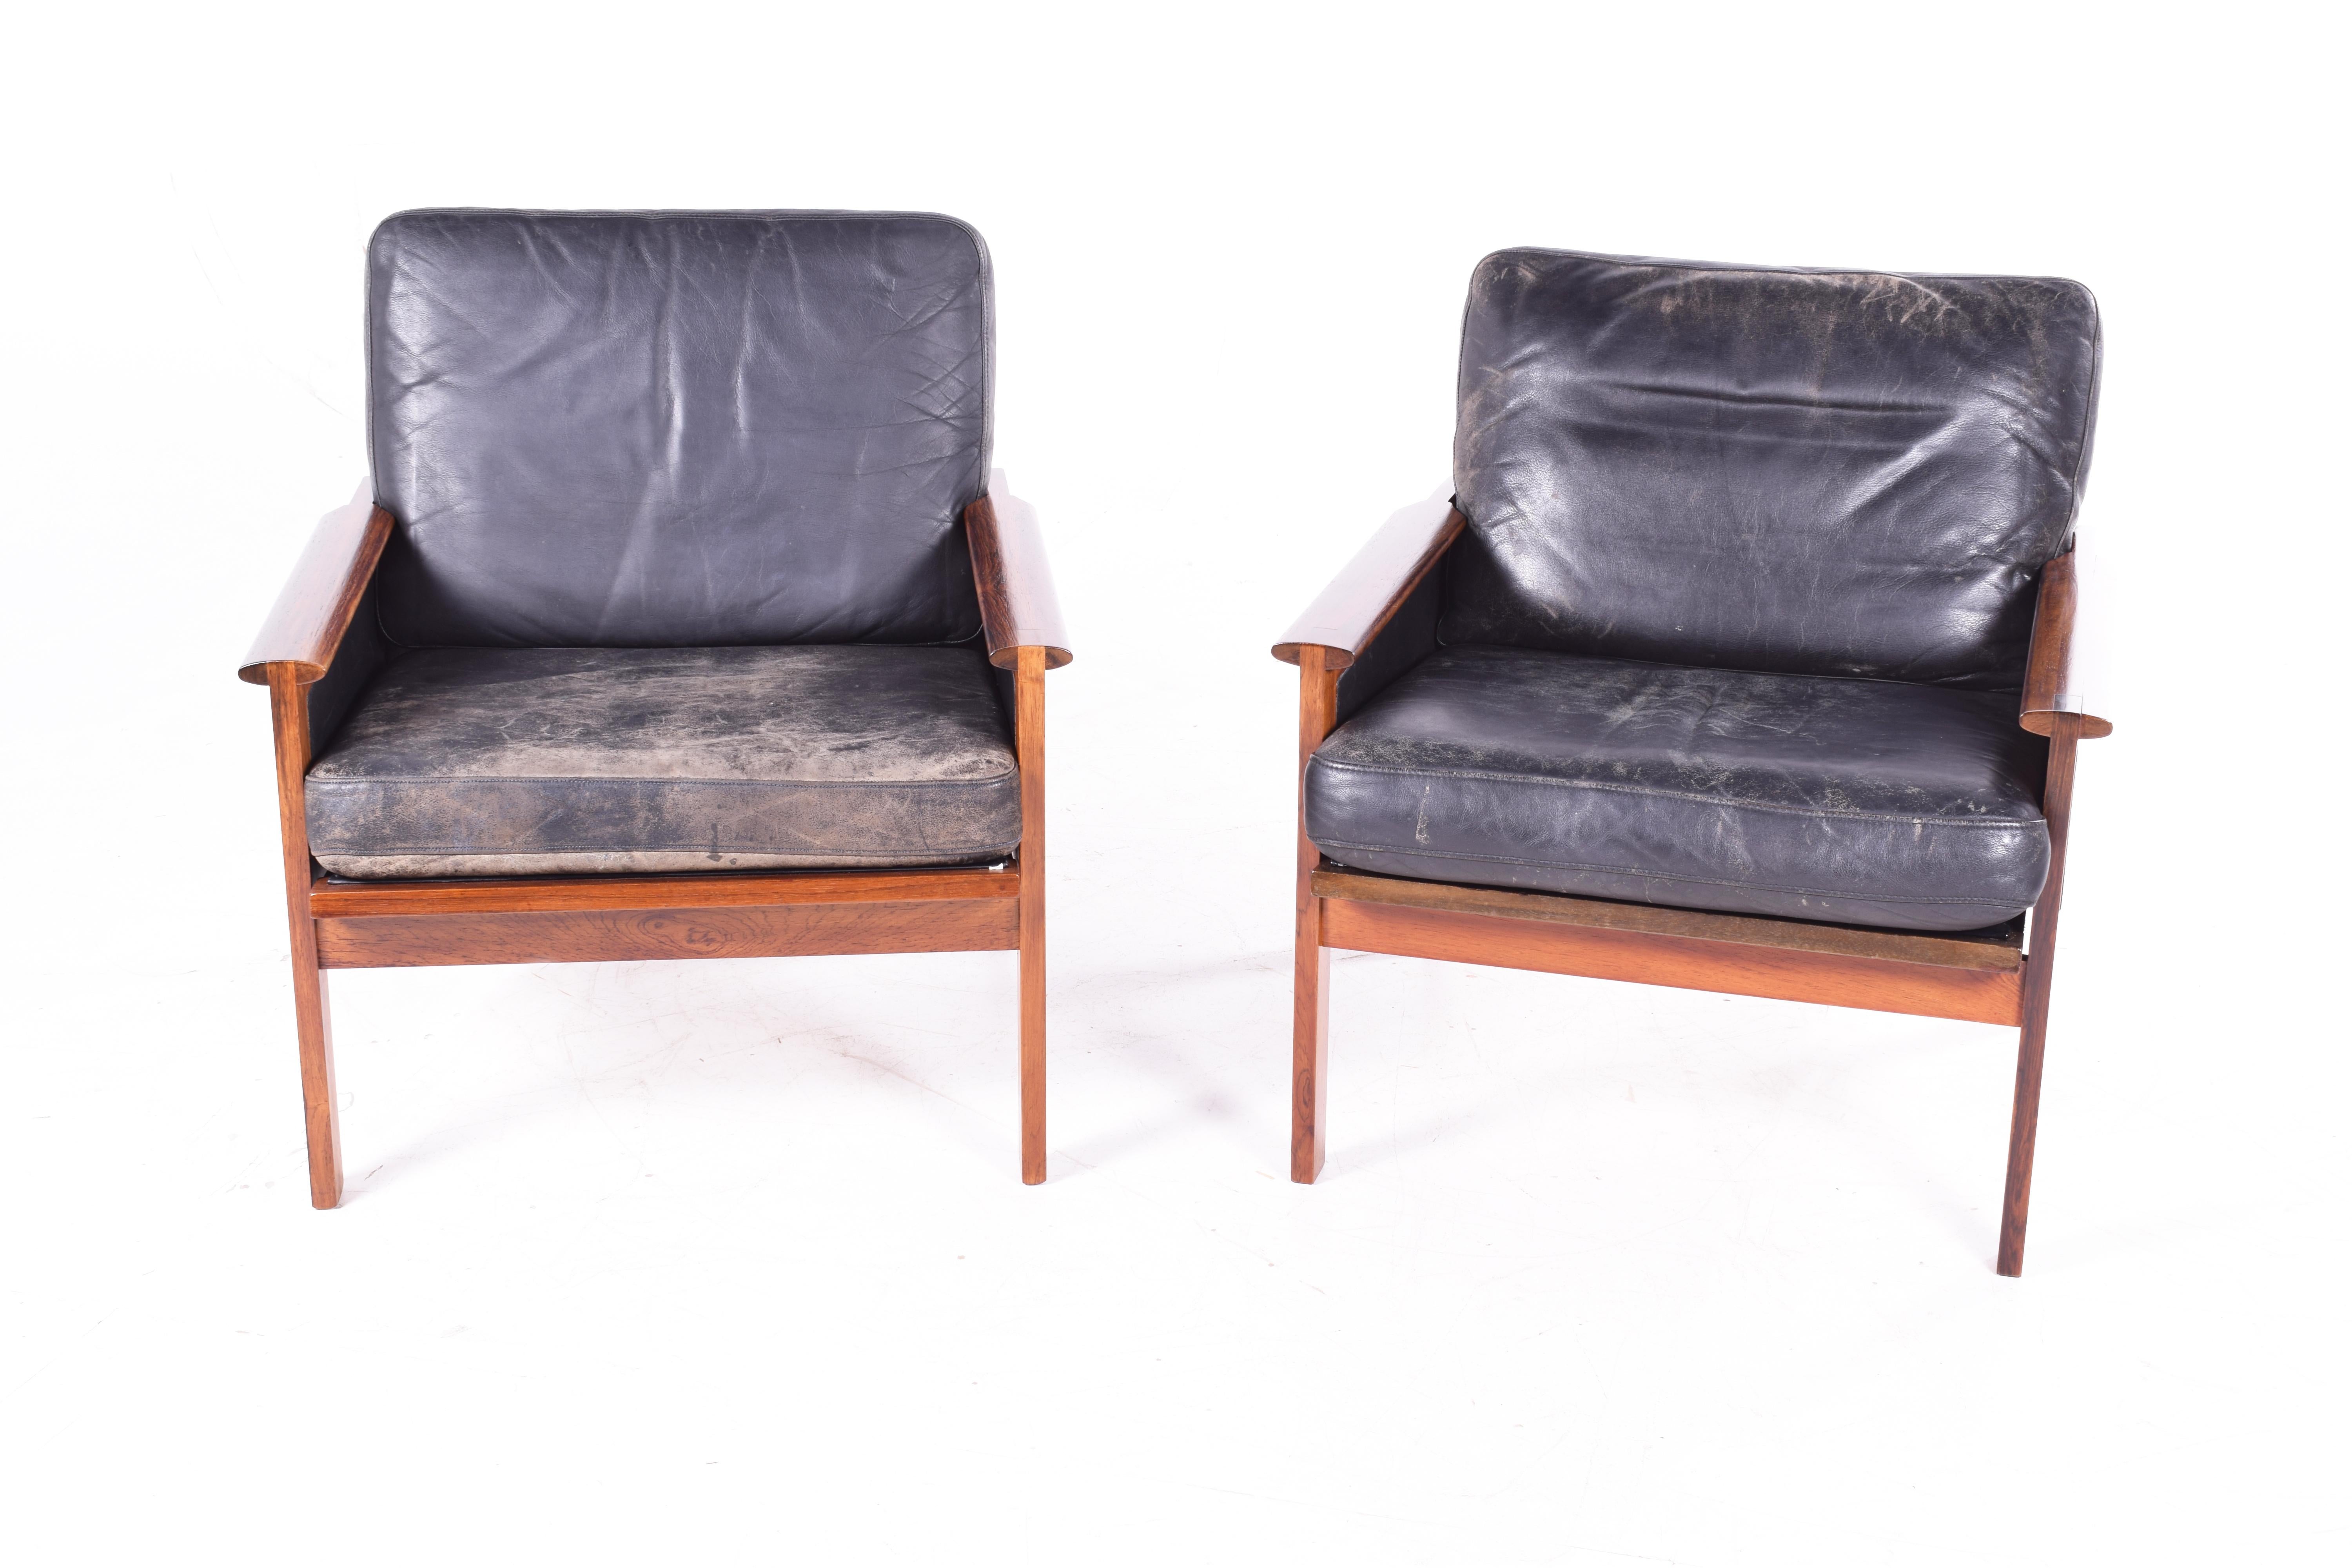 Rosewood armchairs from the Capella Series designed in 1958 by Illum Wikkelsø for Niels Eilersen 
Beautiful rosewood veneer, which emphasizes the contrast between the structure and the black leather cushions and reflects the elegance of the